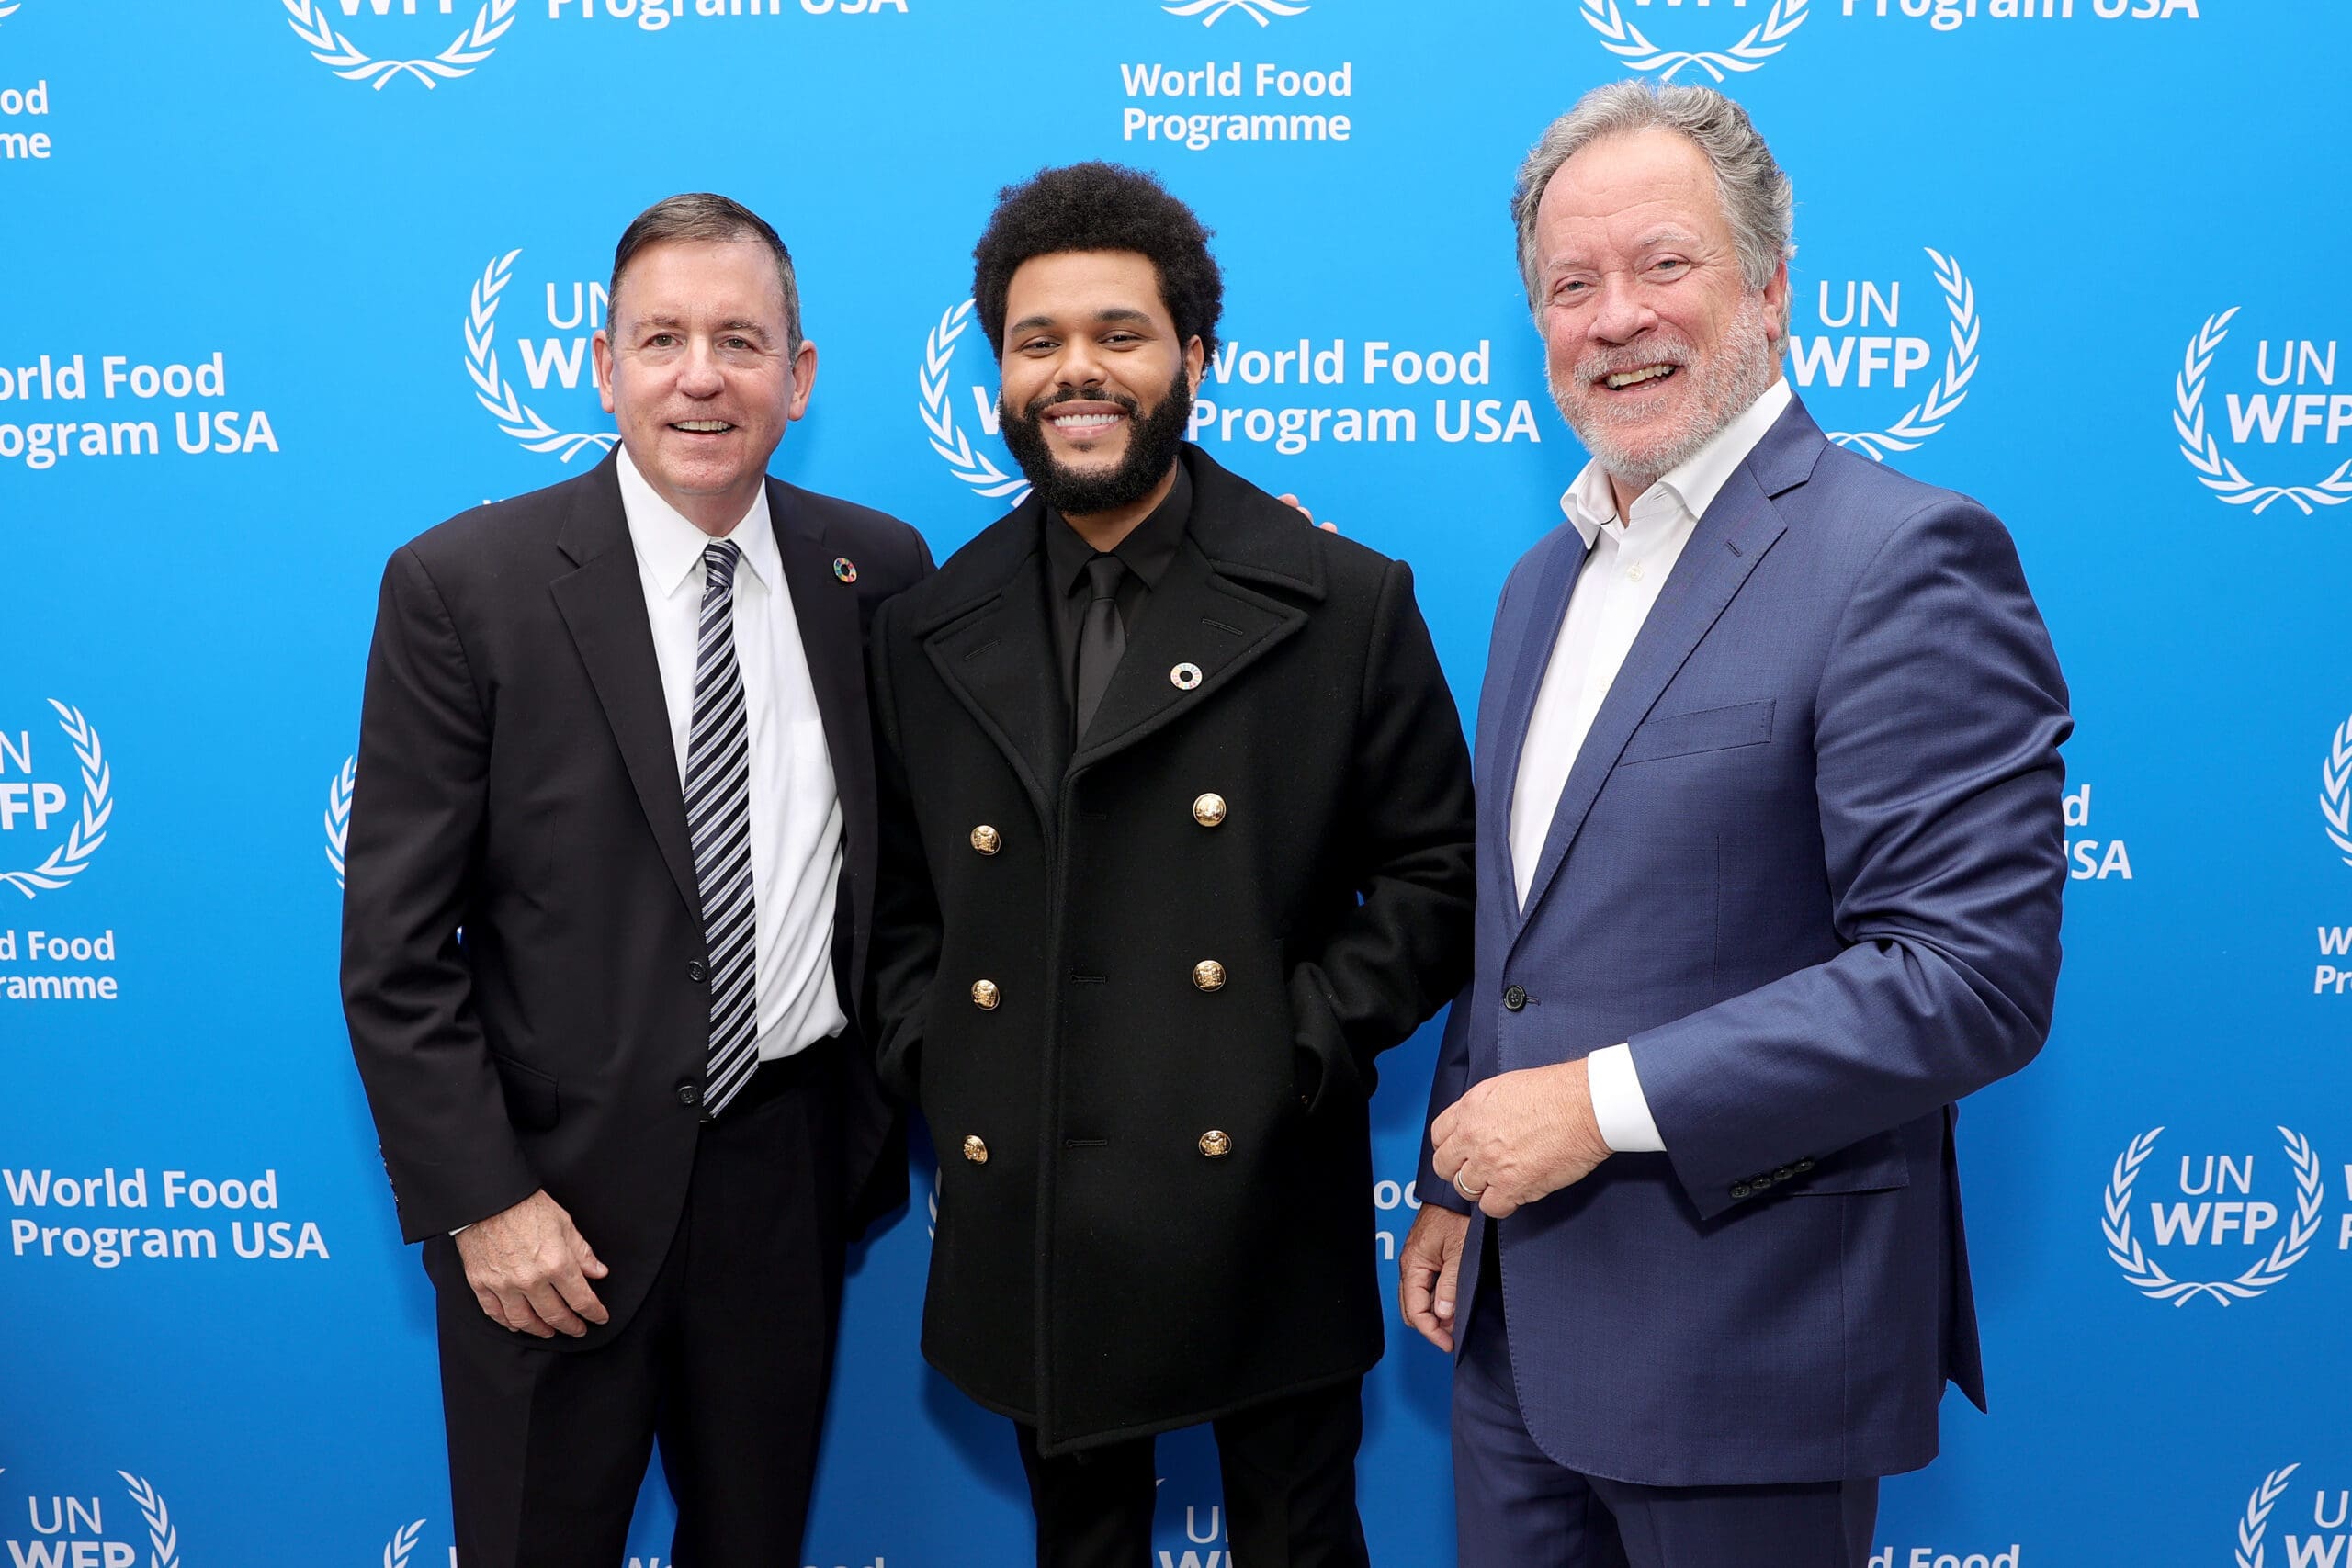 the weeknd joins wfp